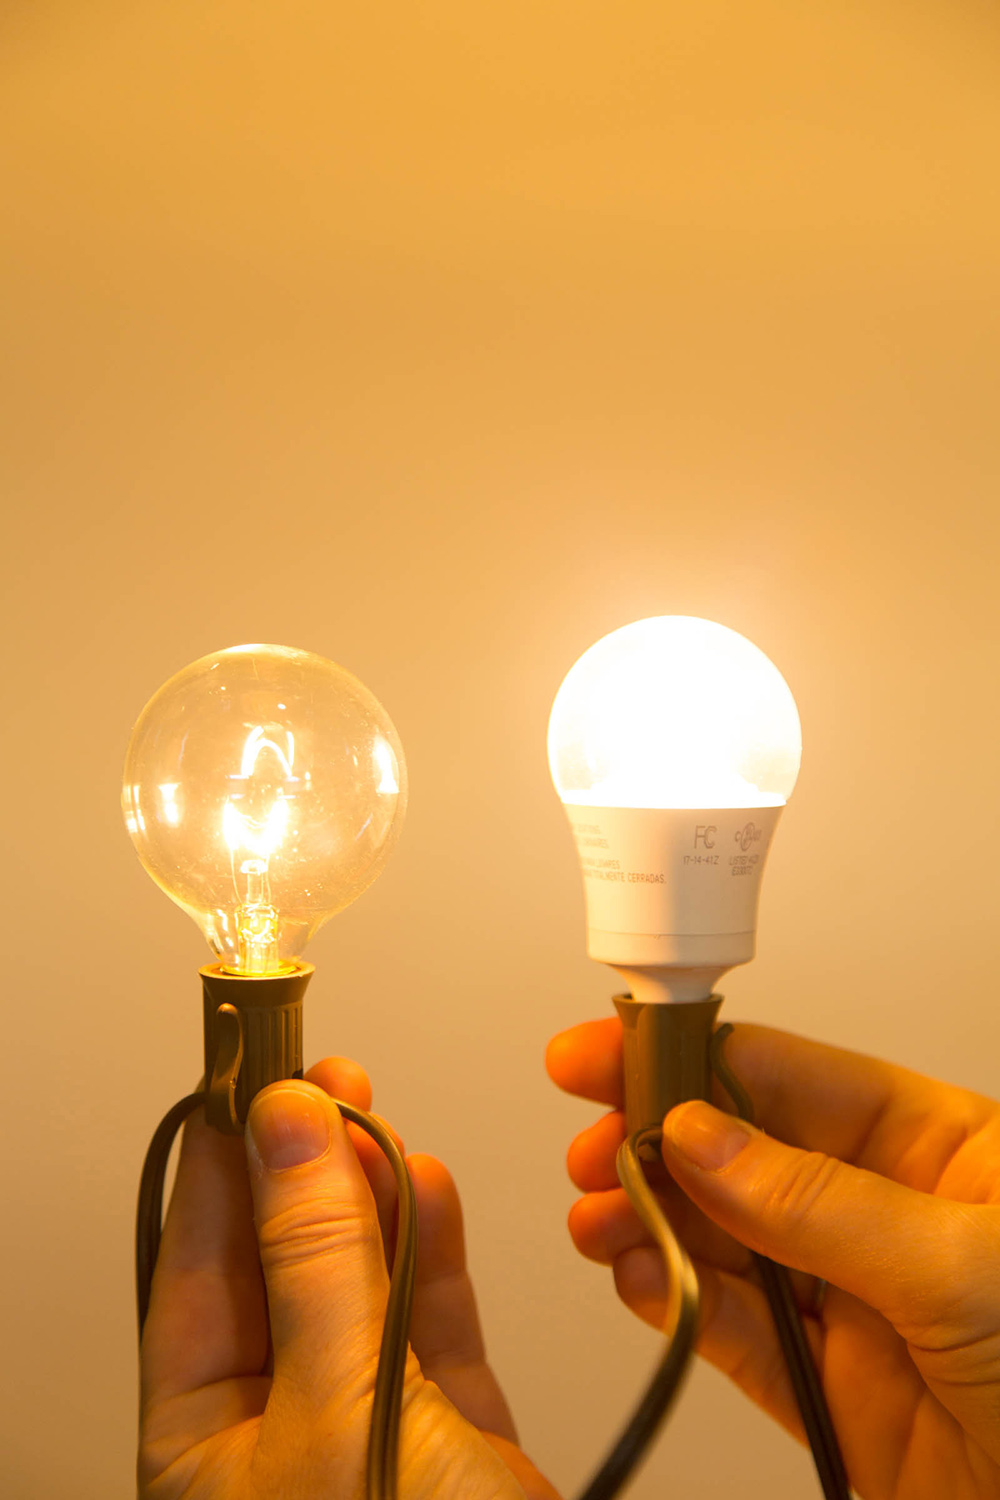 A person holding a LED light bulb and an incandescent light bulb.